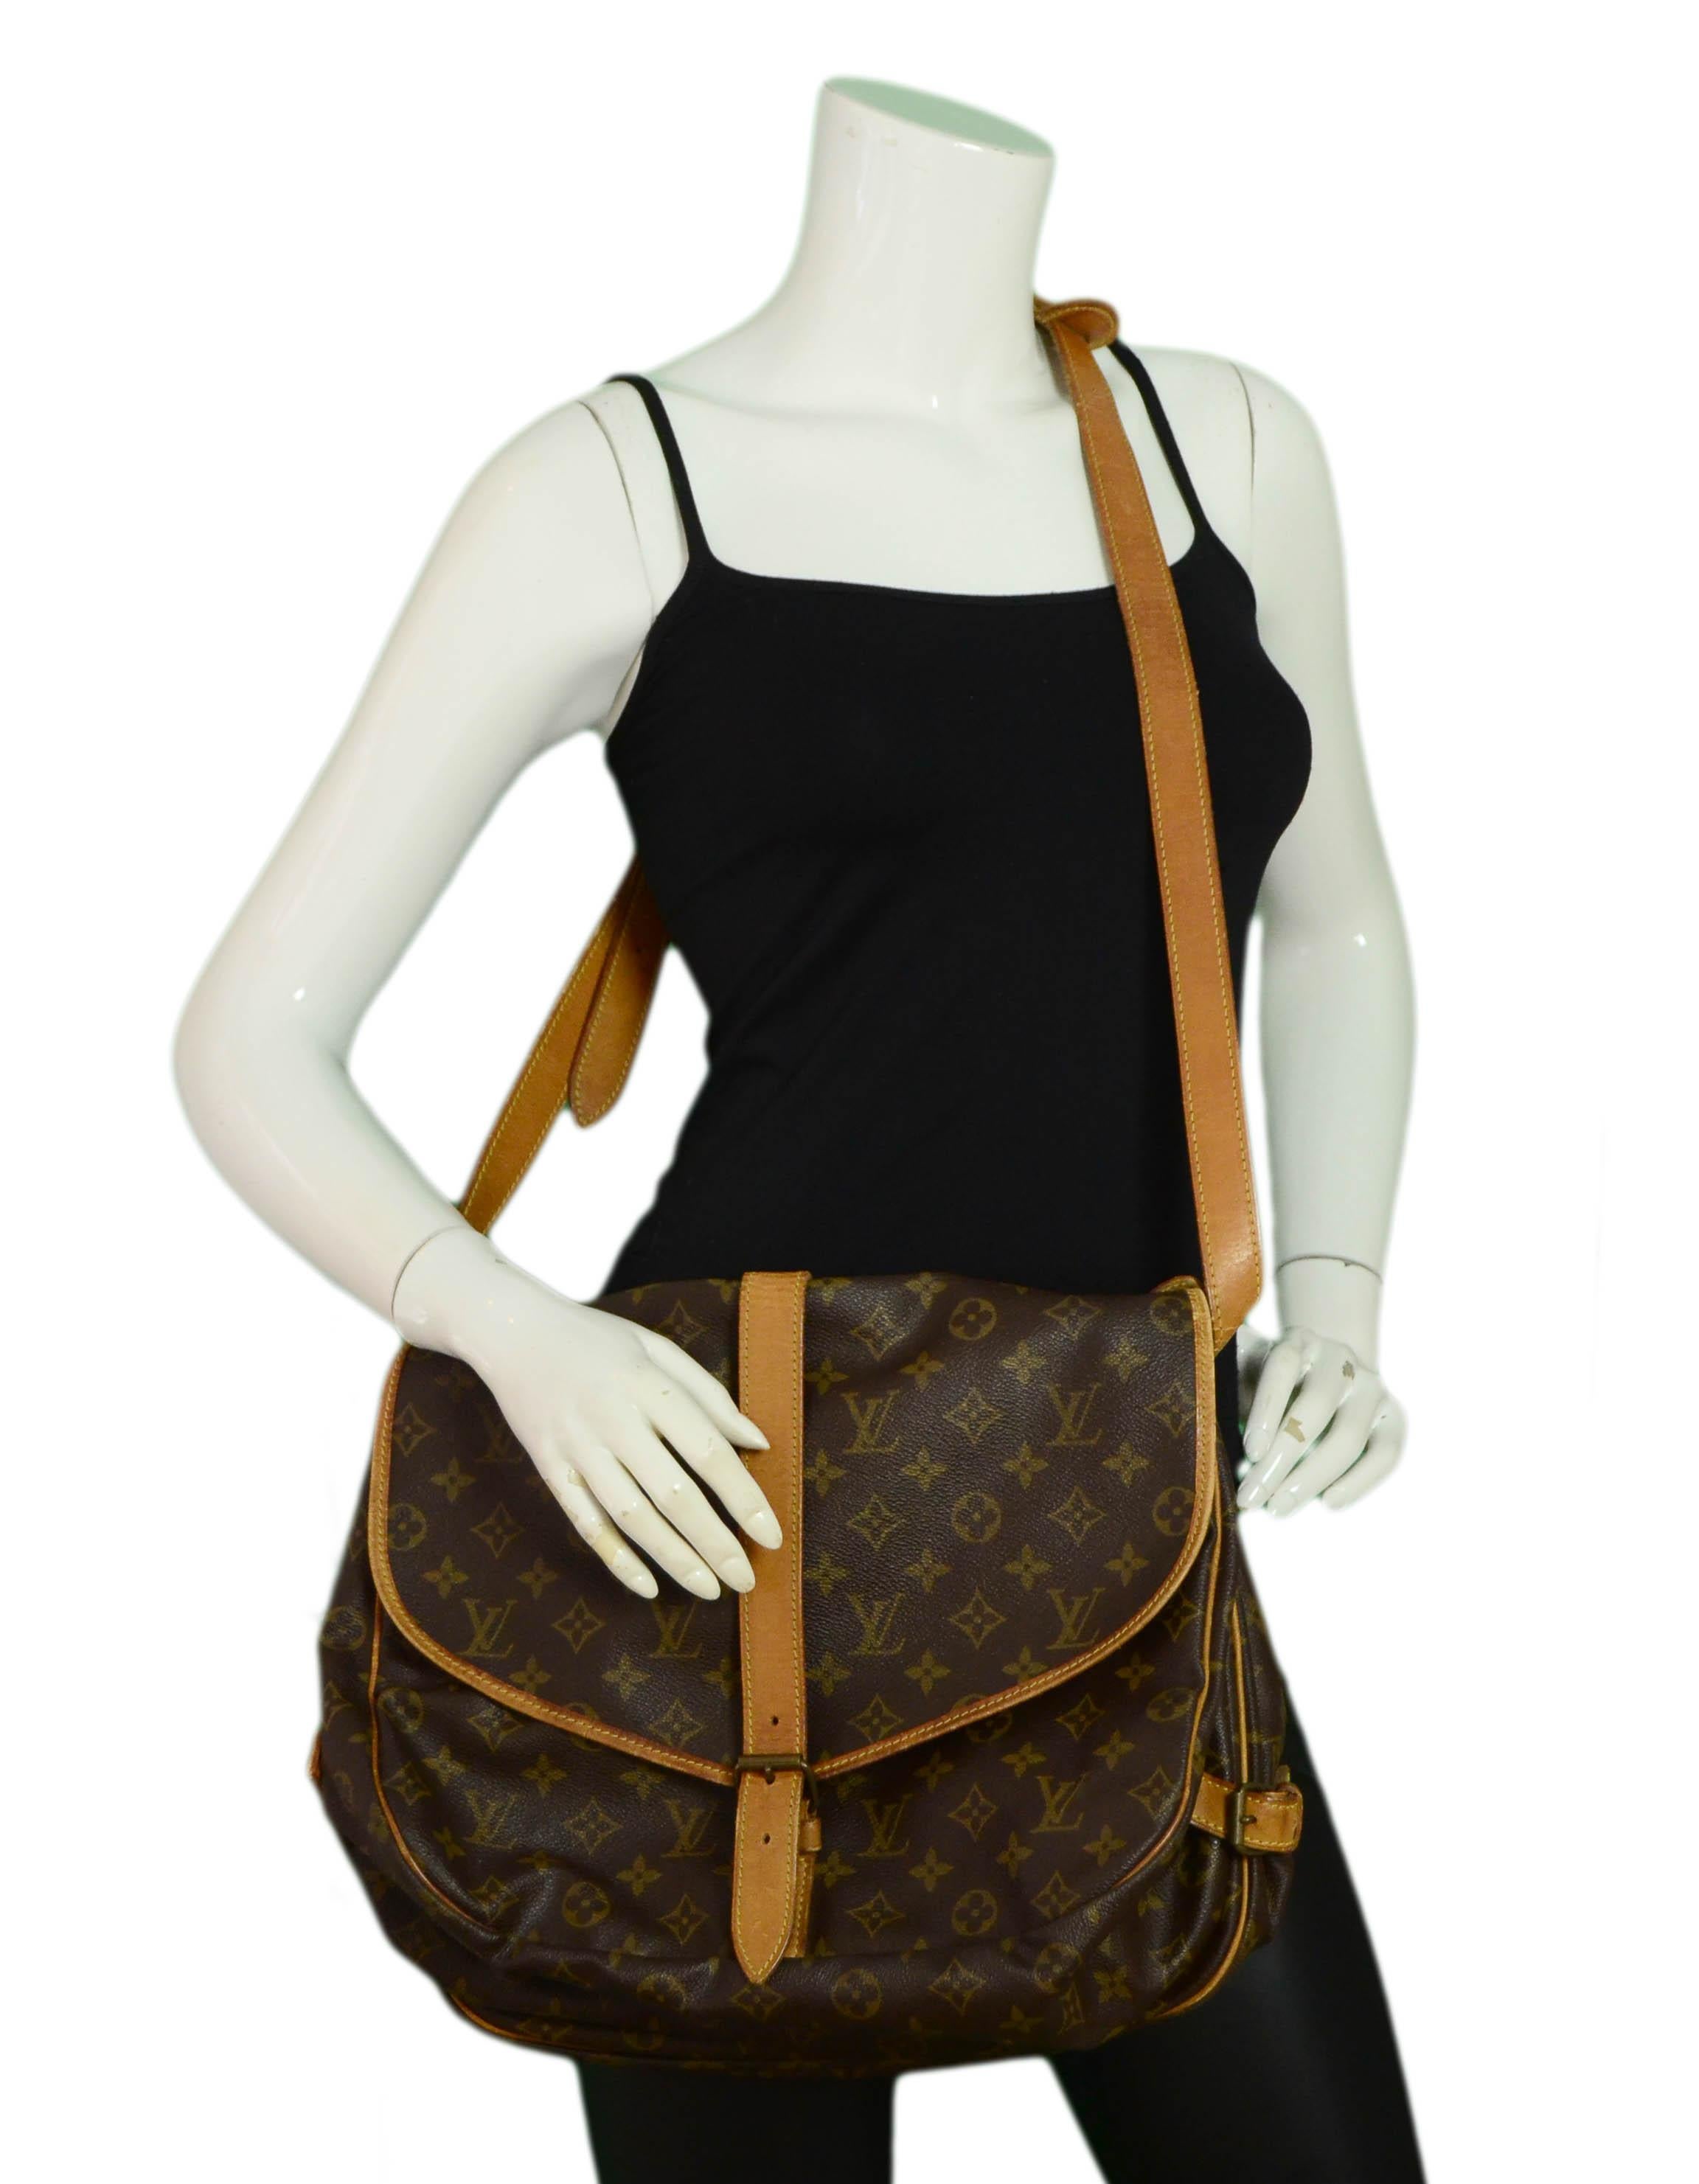 Louis Vuitton Monogram Saumur 35 Double Saddle Messenger Bag

Made In: France
Year of Production: 1990
Color: Brown coated canvas
Hardware: Goldtone
Materials: Coated canvas and vachetta leather
Lining: Canvas
Closure/Opening: Flapover w/buckle